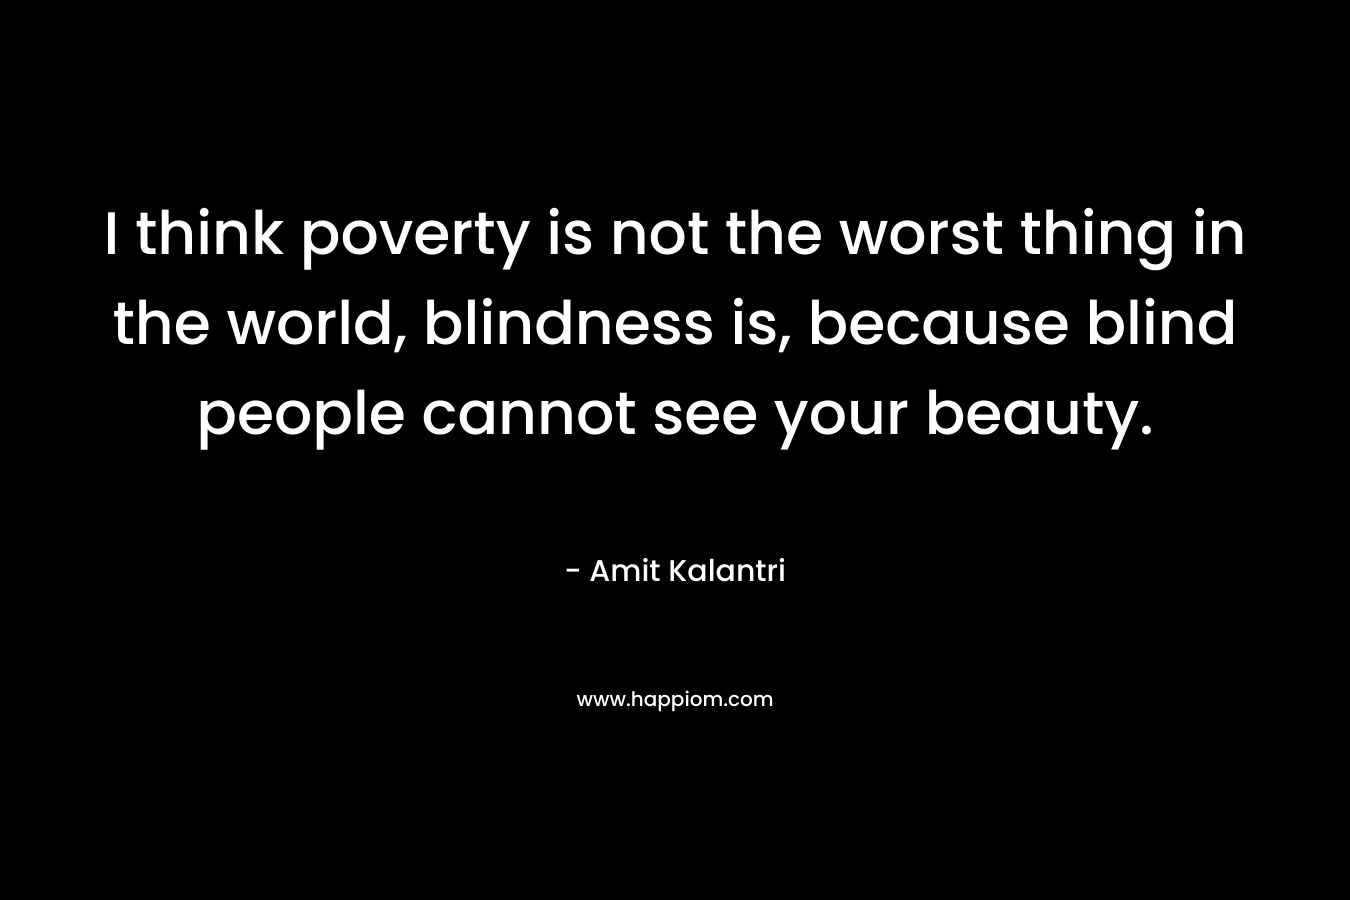 I think poverty is not the worst thing in the world, blindness is, because blind people cannot see your beauty. – Amit Kalantri